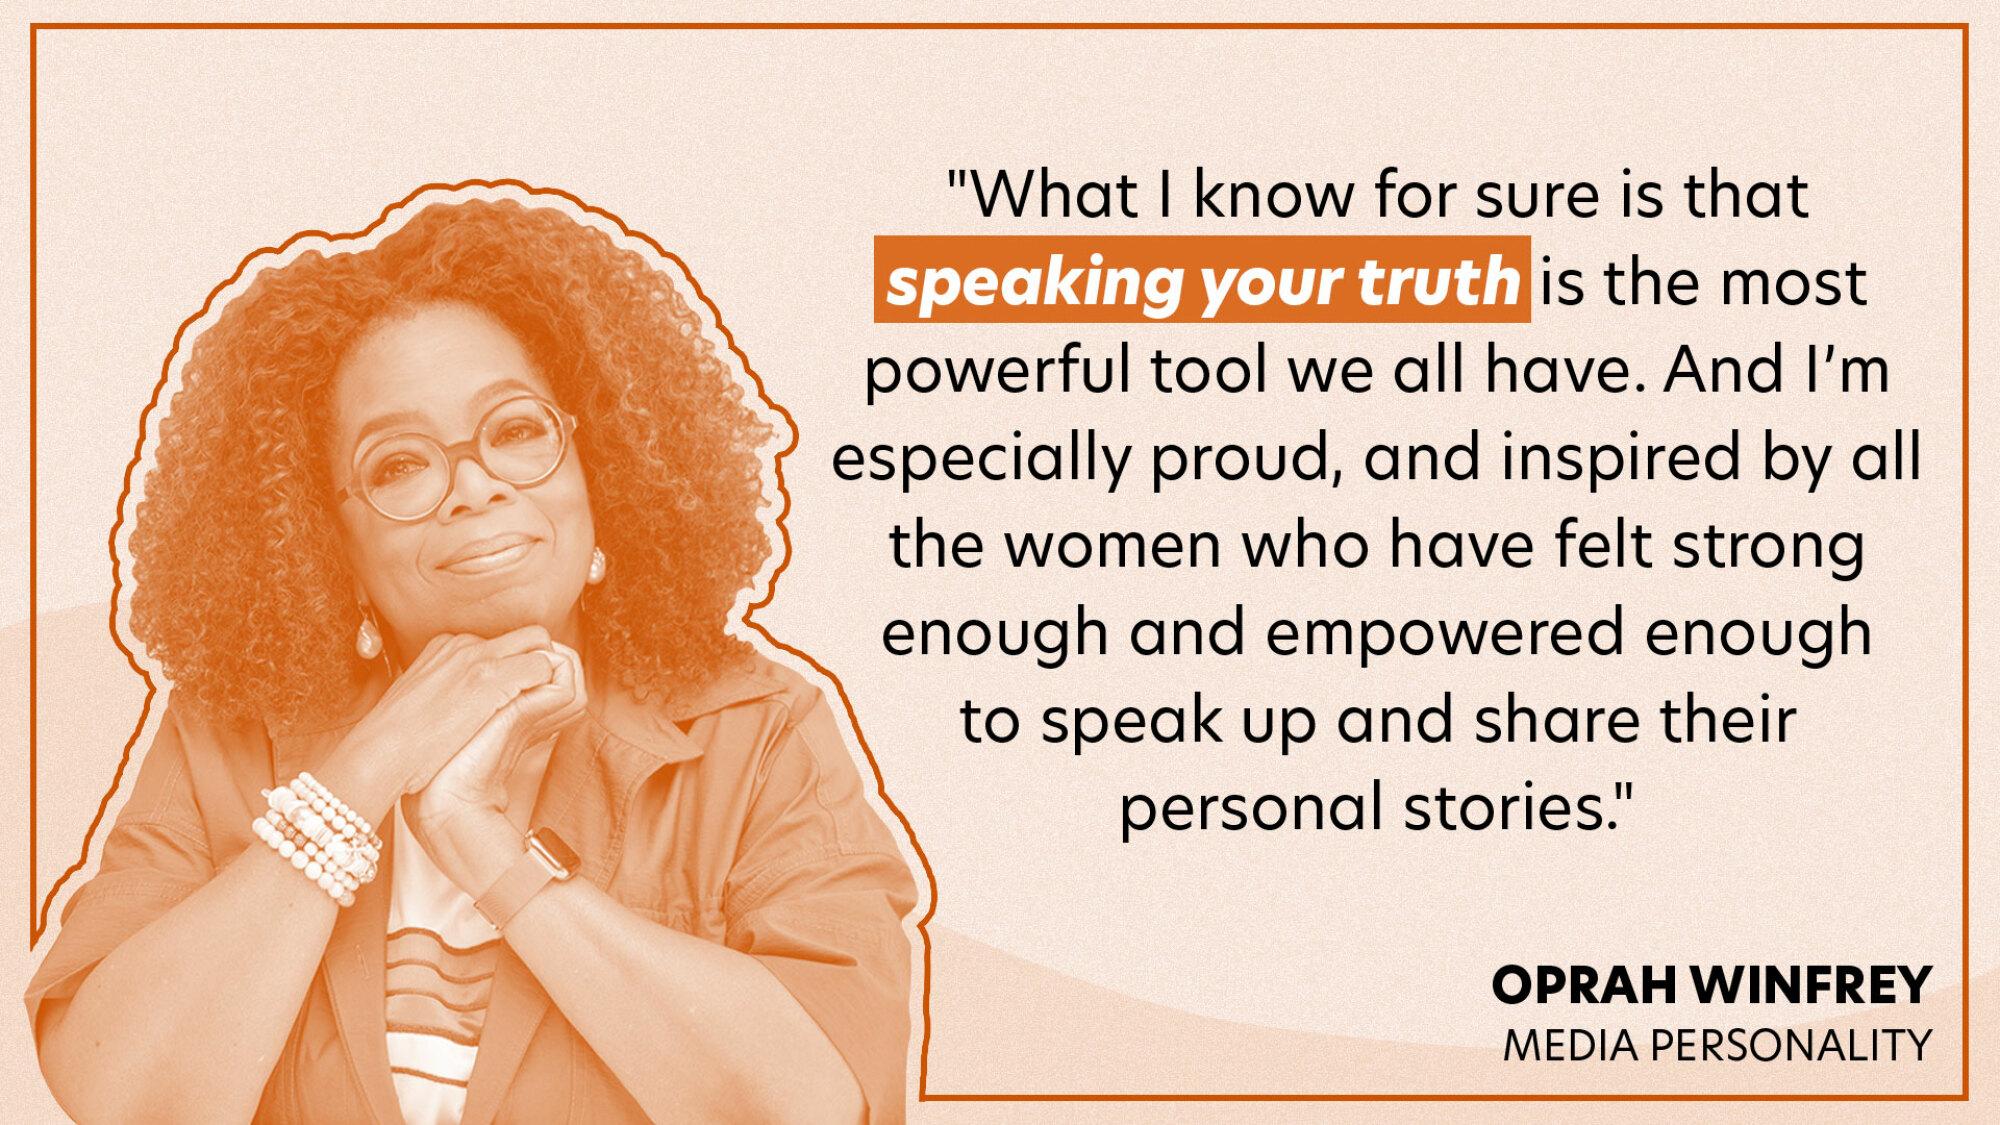 "What I know for sure is that speaking your truth is the most powerful tool we all have. And I’m especially proud, and inspired by all the women who have felt strong enough and empowered enough to speak up and share their personal stories."